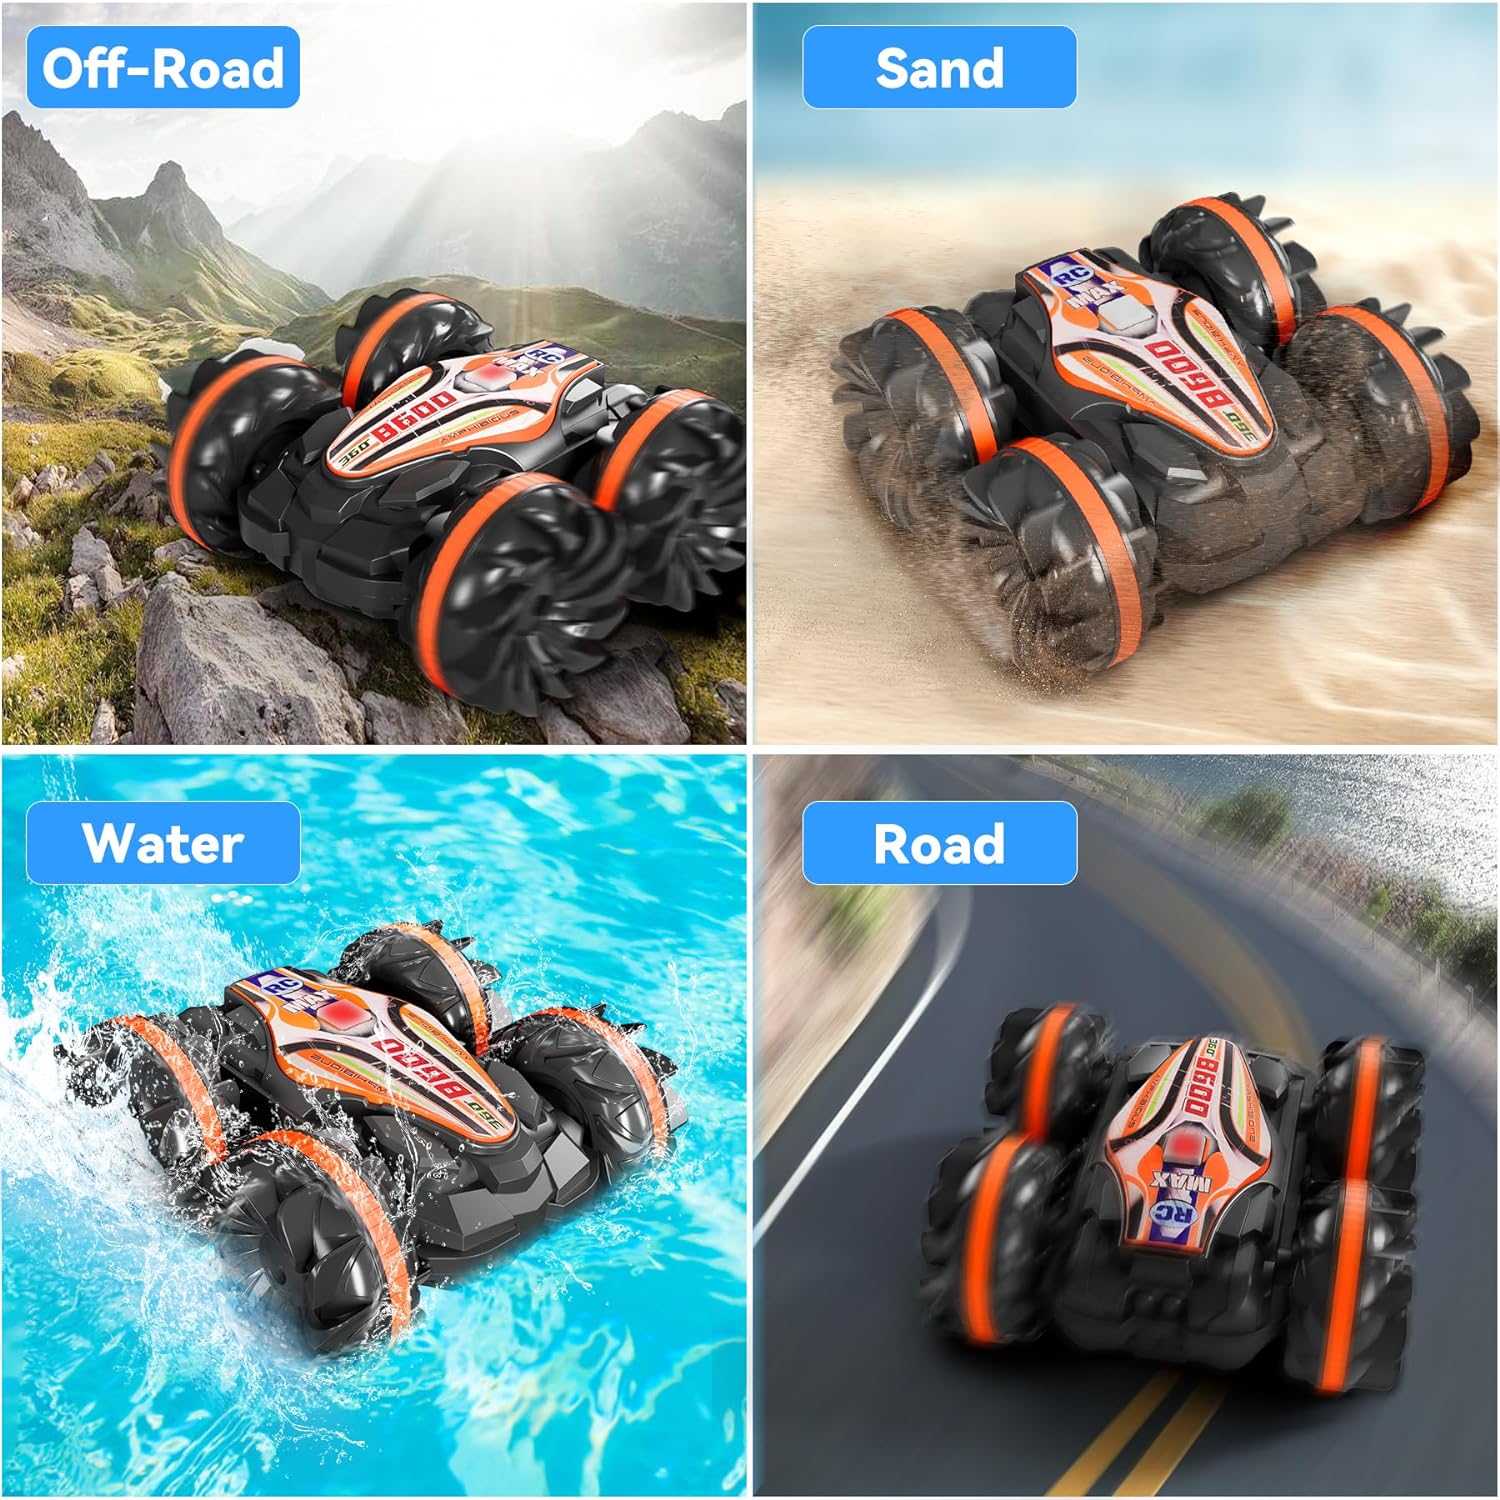 Xynzzeu Amphibious Remote Control Car: A Review of the Ultimate Stunt Car for Kids